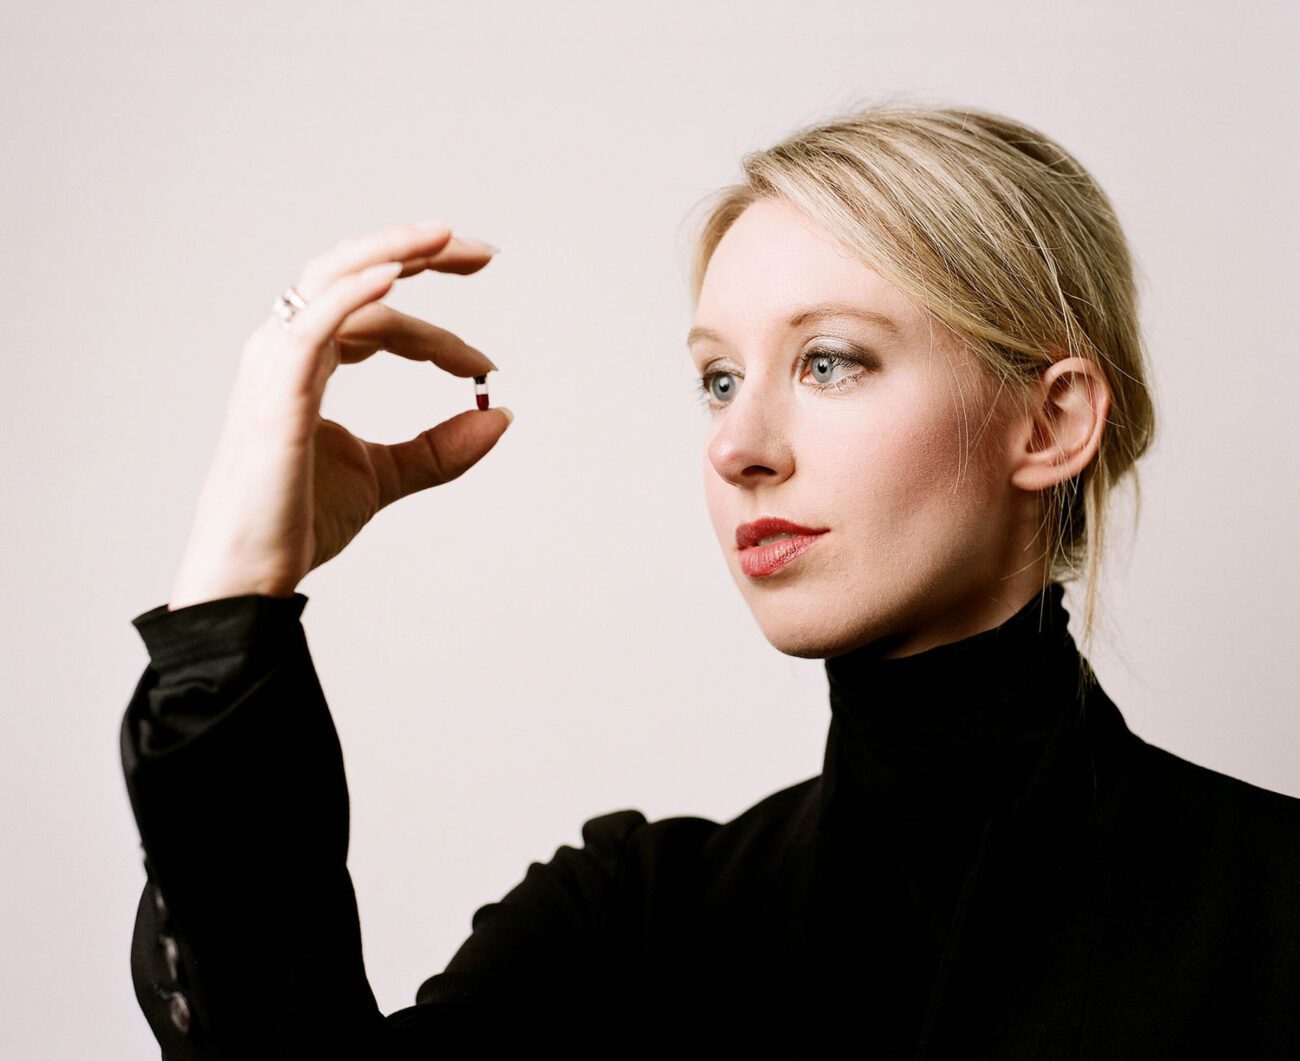 Who is Elizabeth Holmes? The answer has changed drastically in just a few years. Is she a genius, a fraud, or a victim? Dive into the details.